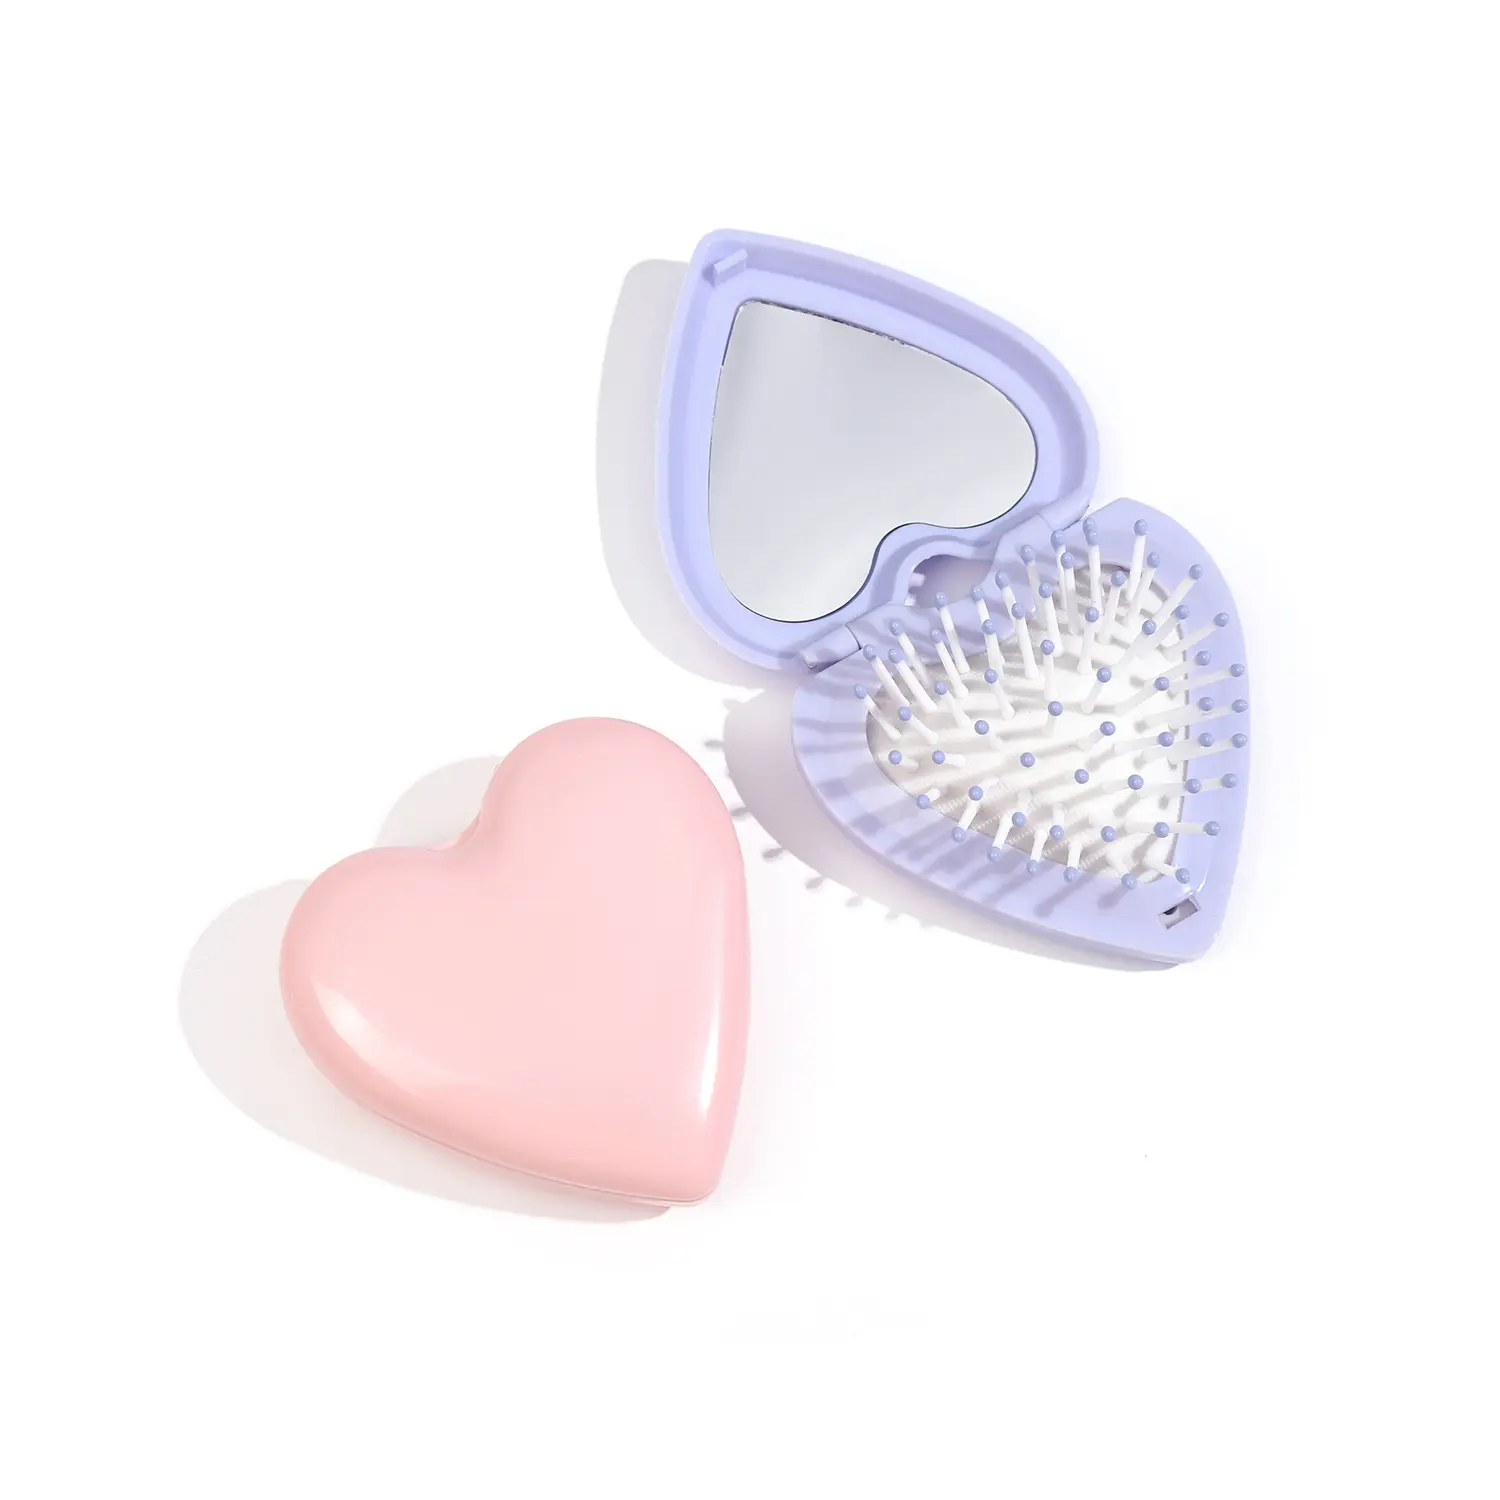 New Heart Shape Detangling Hair Combs Mini Folding Pocket Pop-Up Hair Brush Personalized Pocket Hair Comb With Mirror